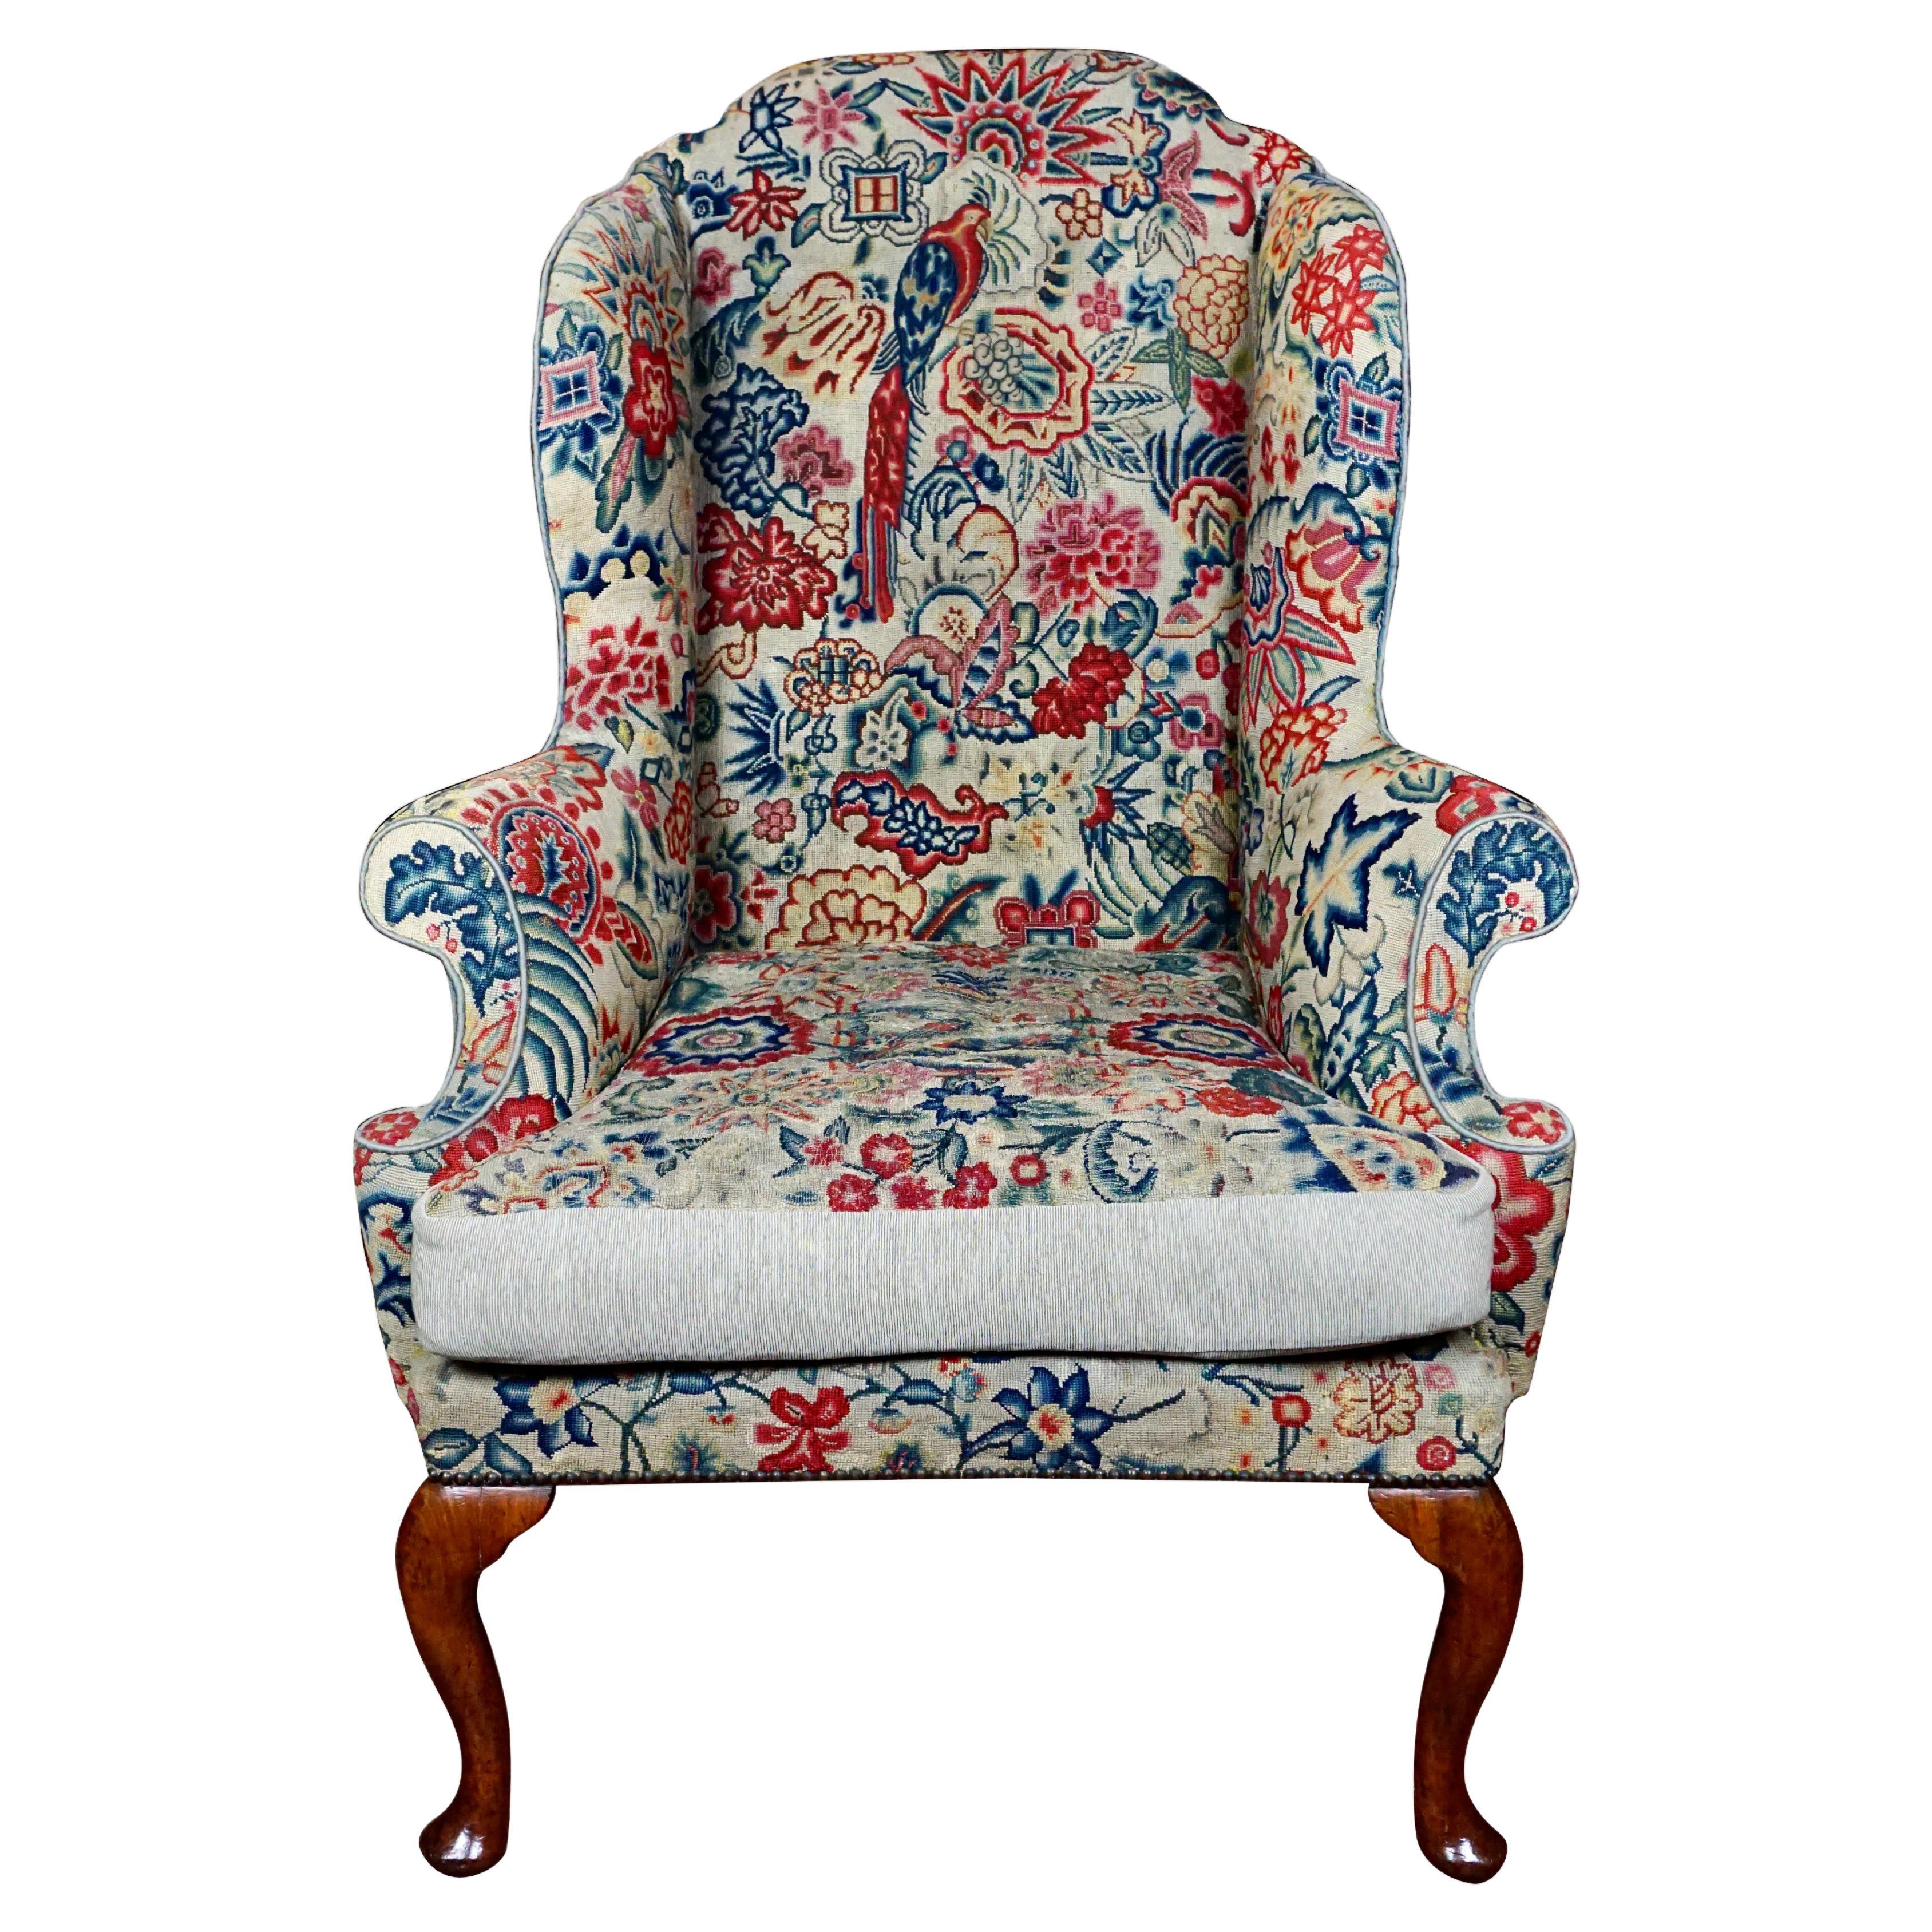 Fine and Rare George II Period Needlepoint Upholstered Walnut Wing Armchair For Sale